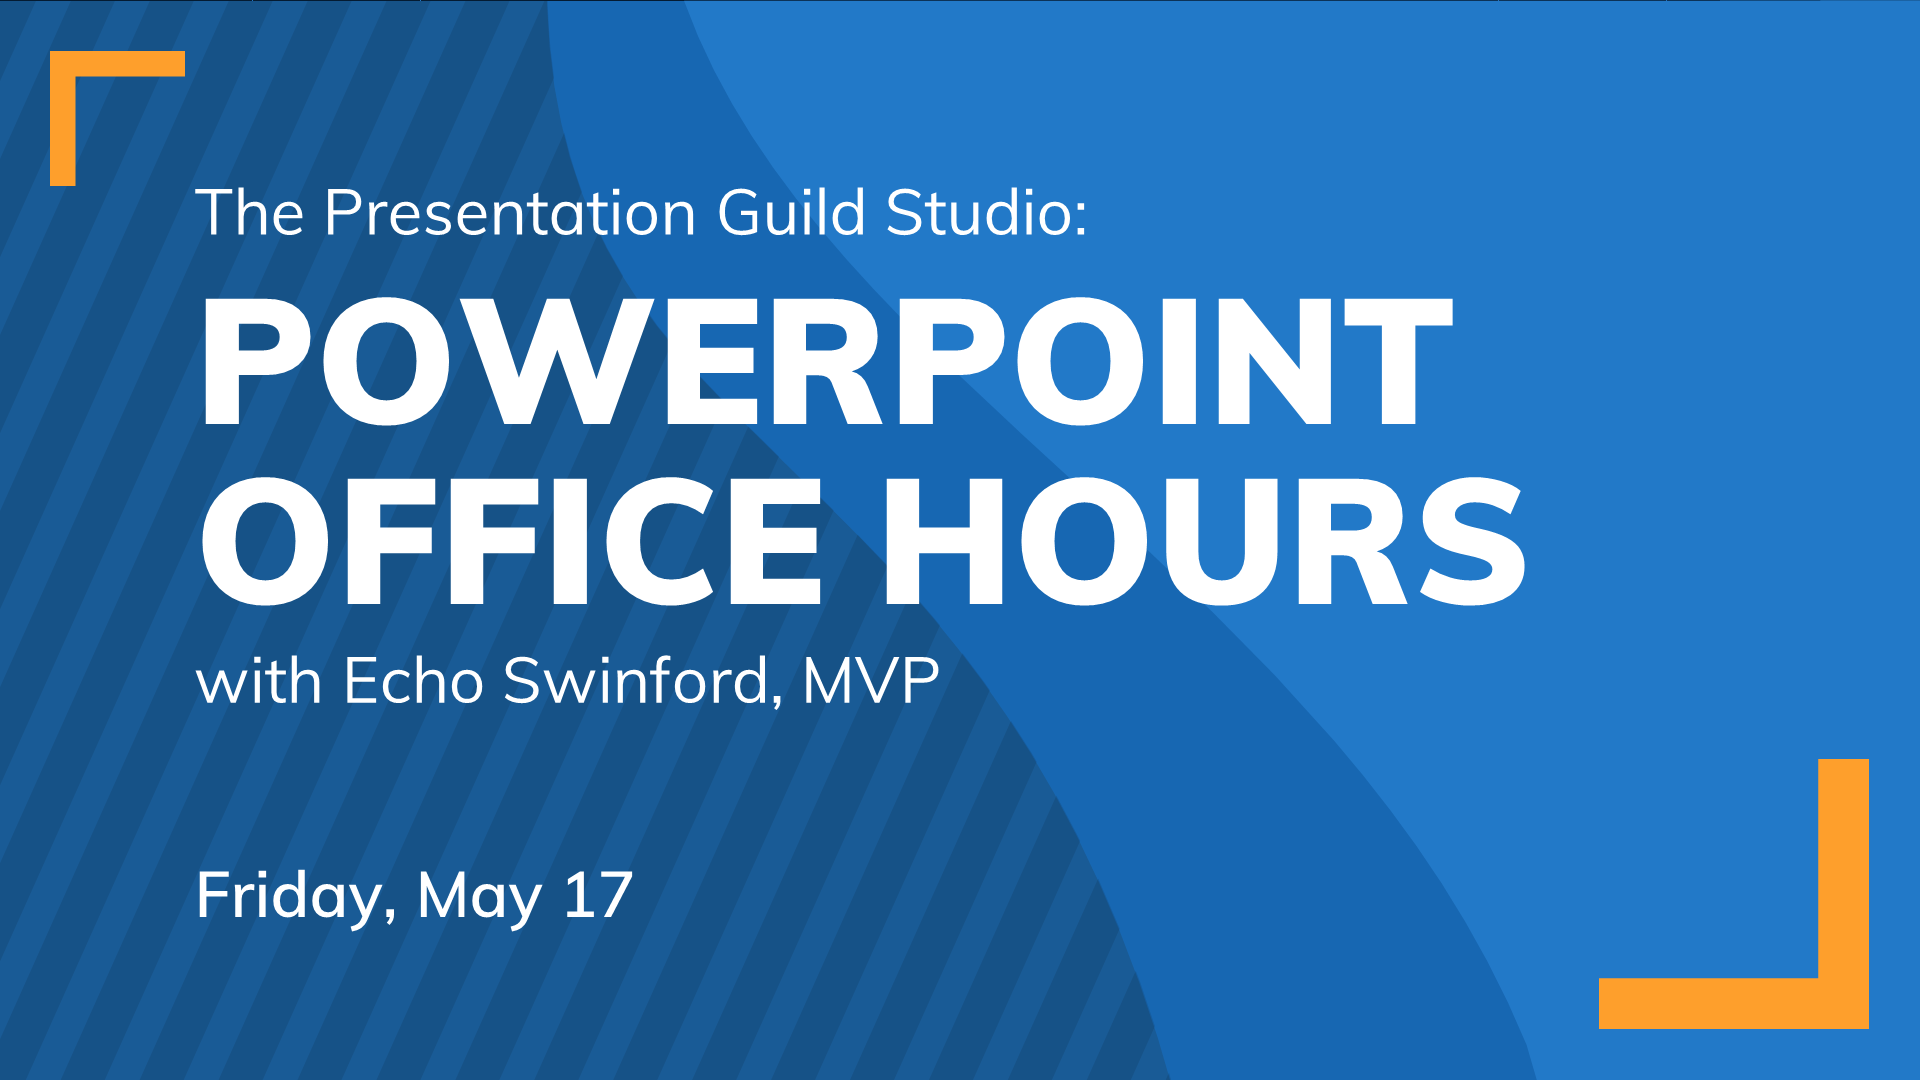 PowerPoint Office Hours: Friday, May 17